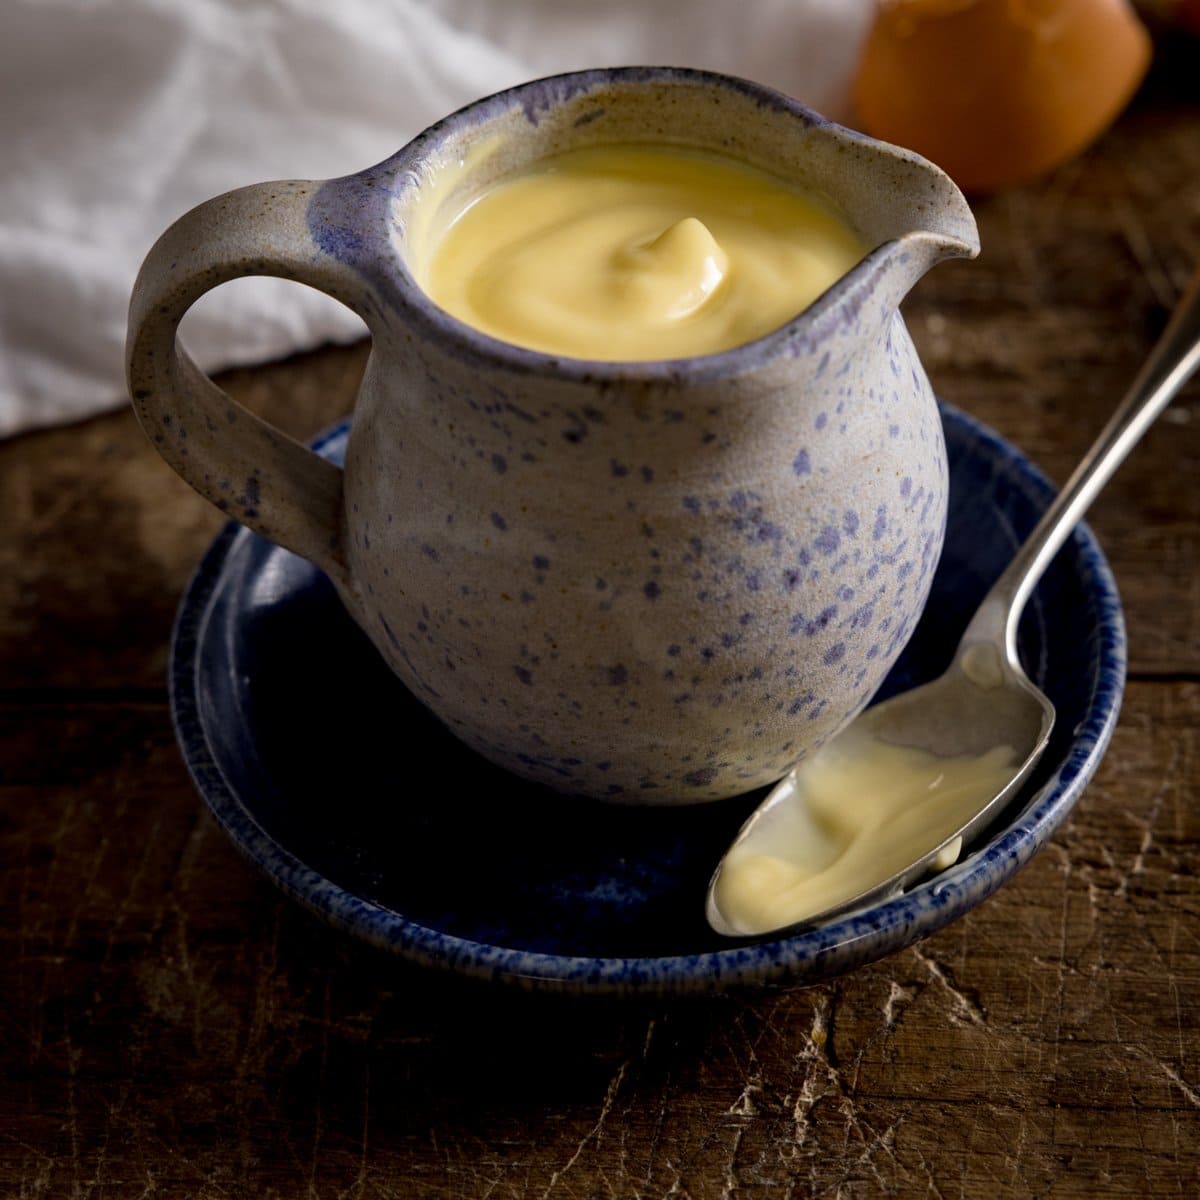 A square image of a blue jug filled with custard, sat on a blue plate with a spoon next to it. On a wooden table with a white tea towel on the side